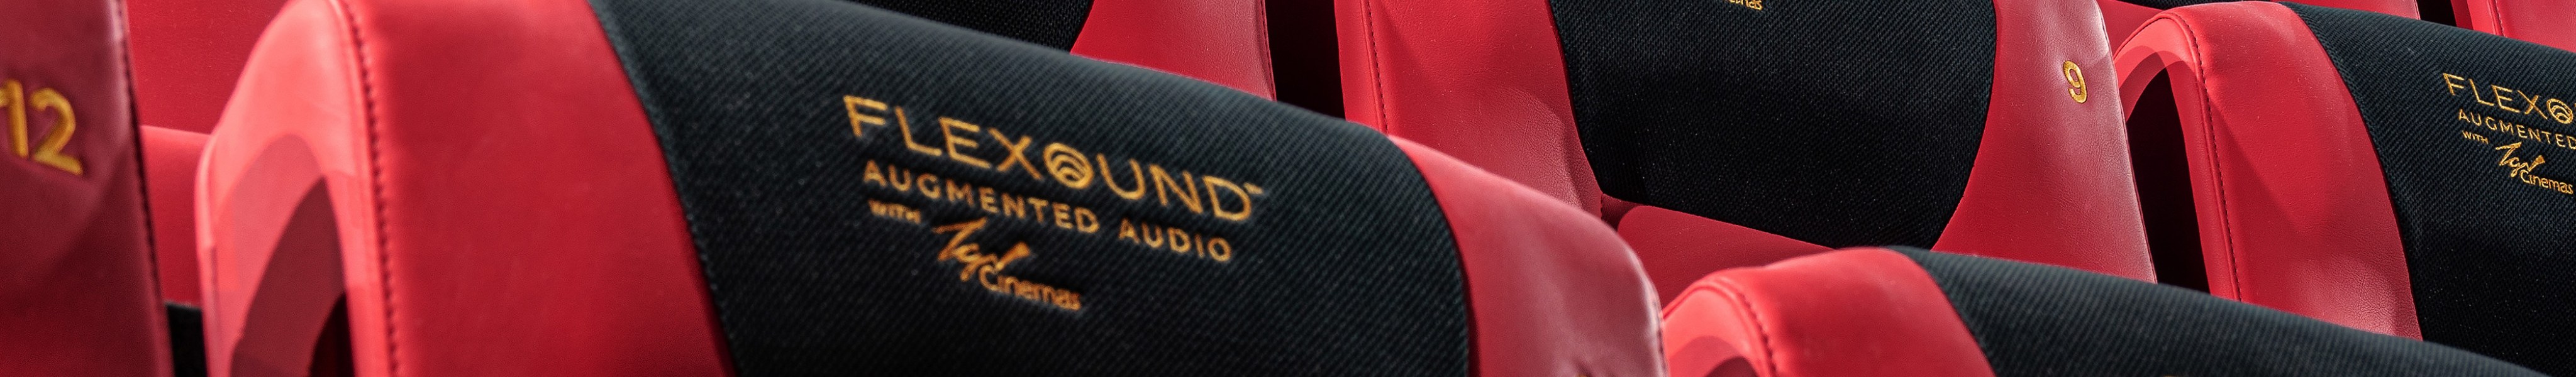 Red-black seats in a movie theatre. 